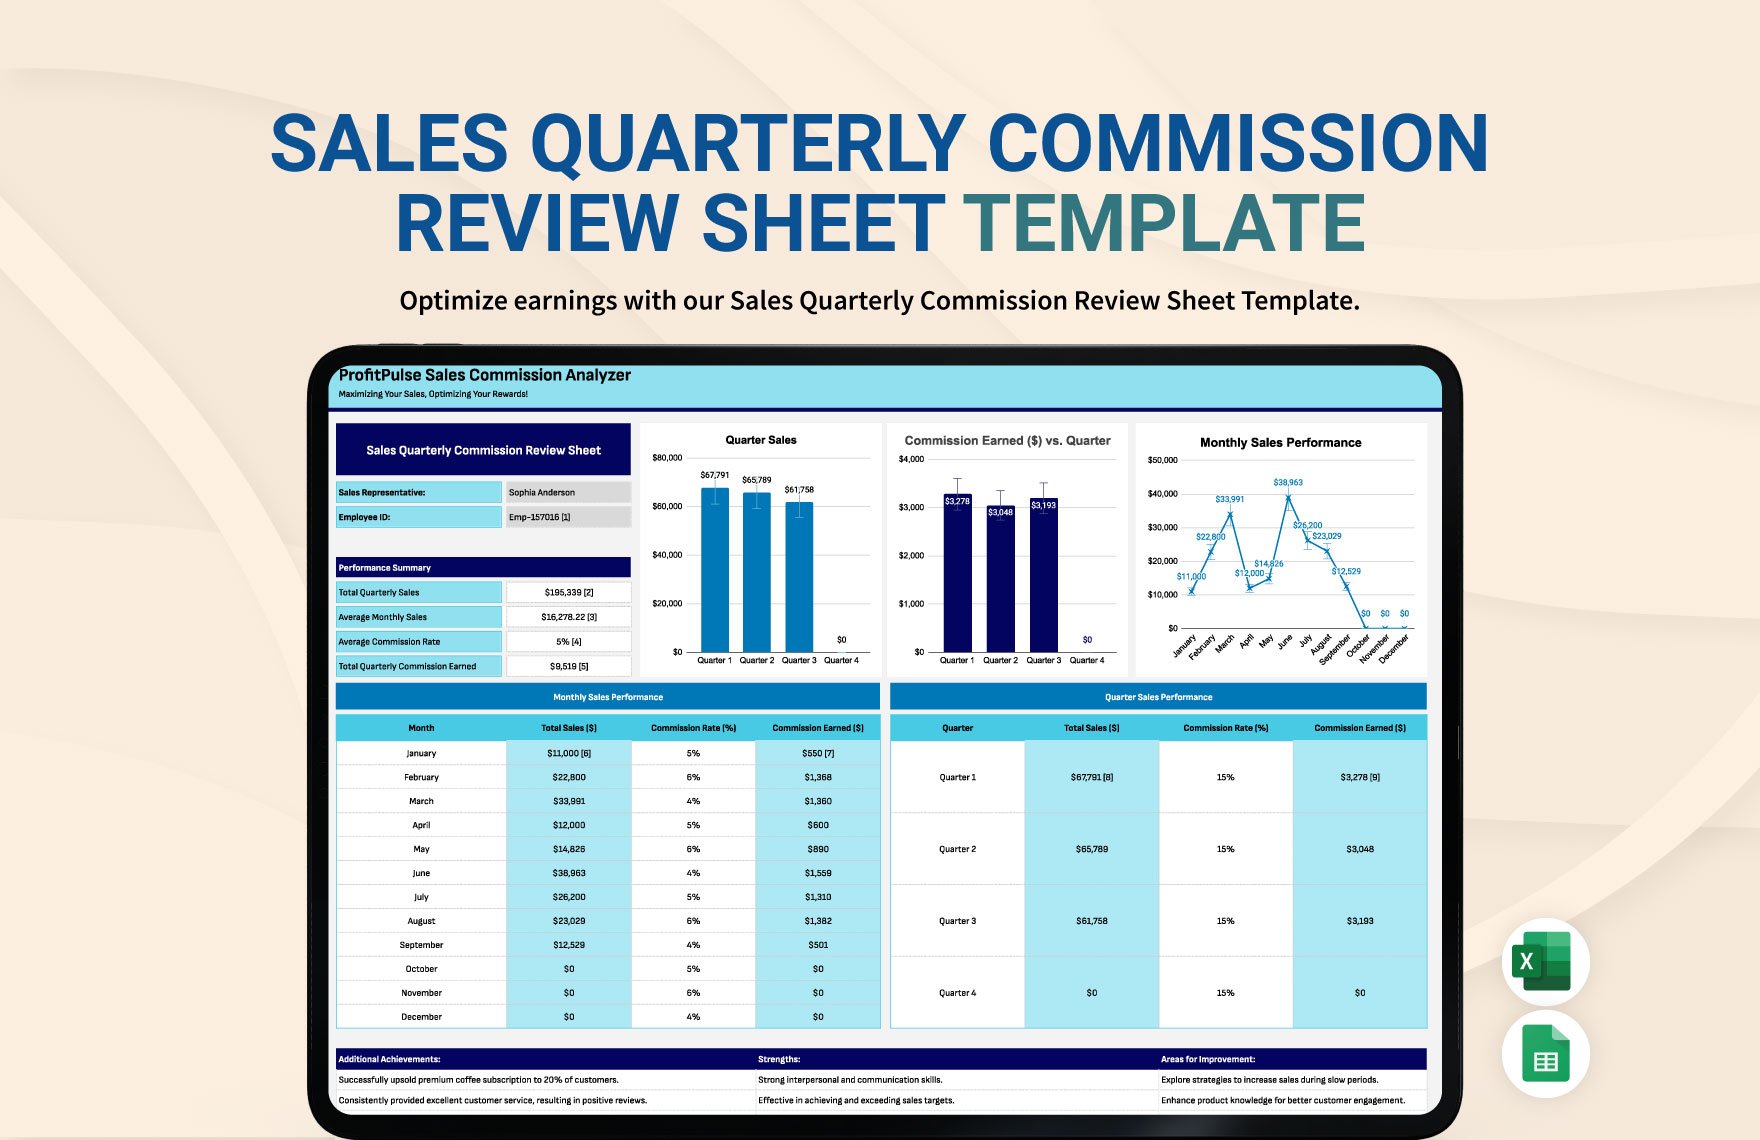 Sales Quarterly Commission Review Sheet Template